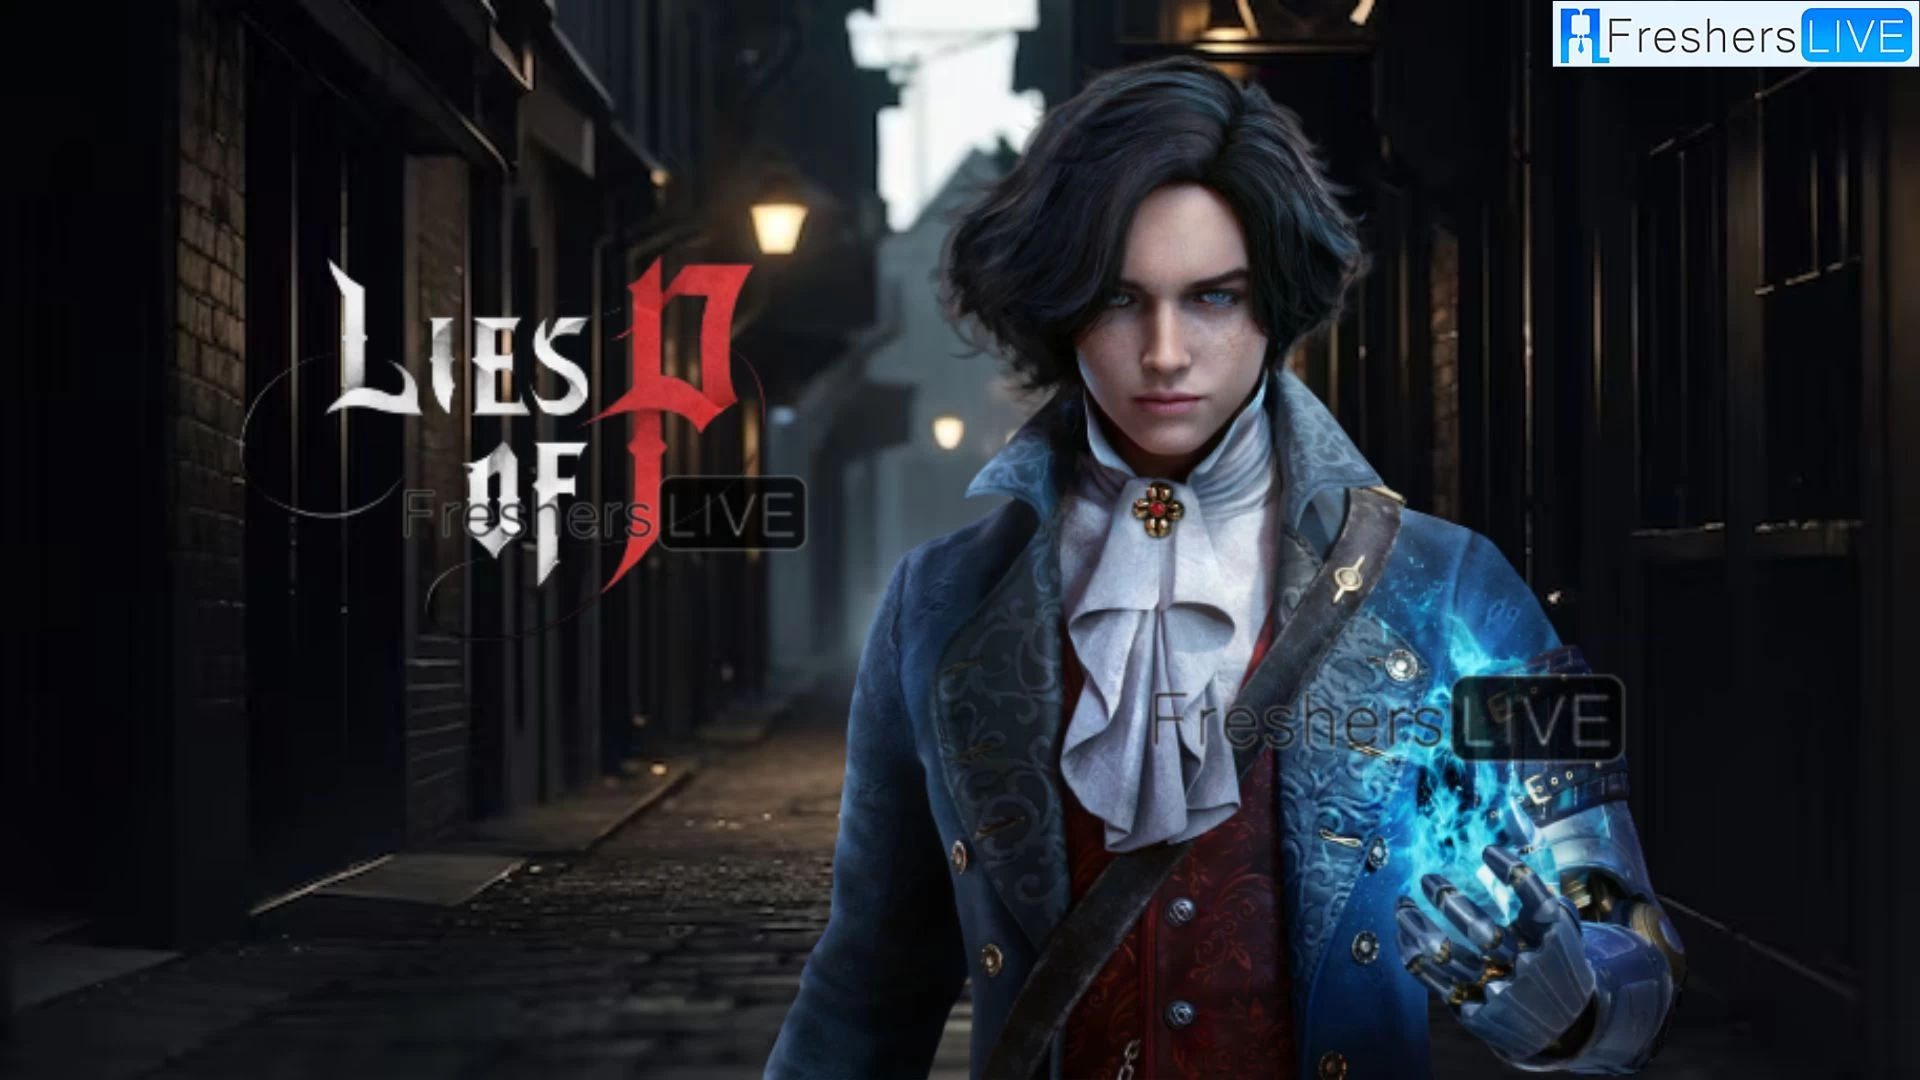 How to Beat the Nameless Puppet in Lies of P? Find Out Here